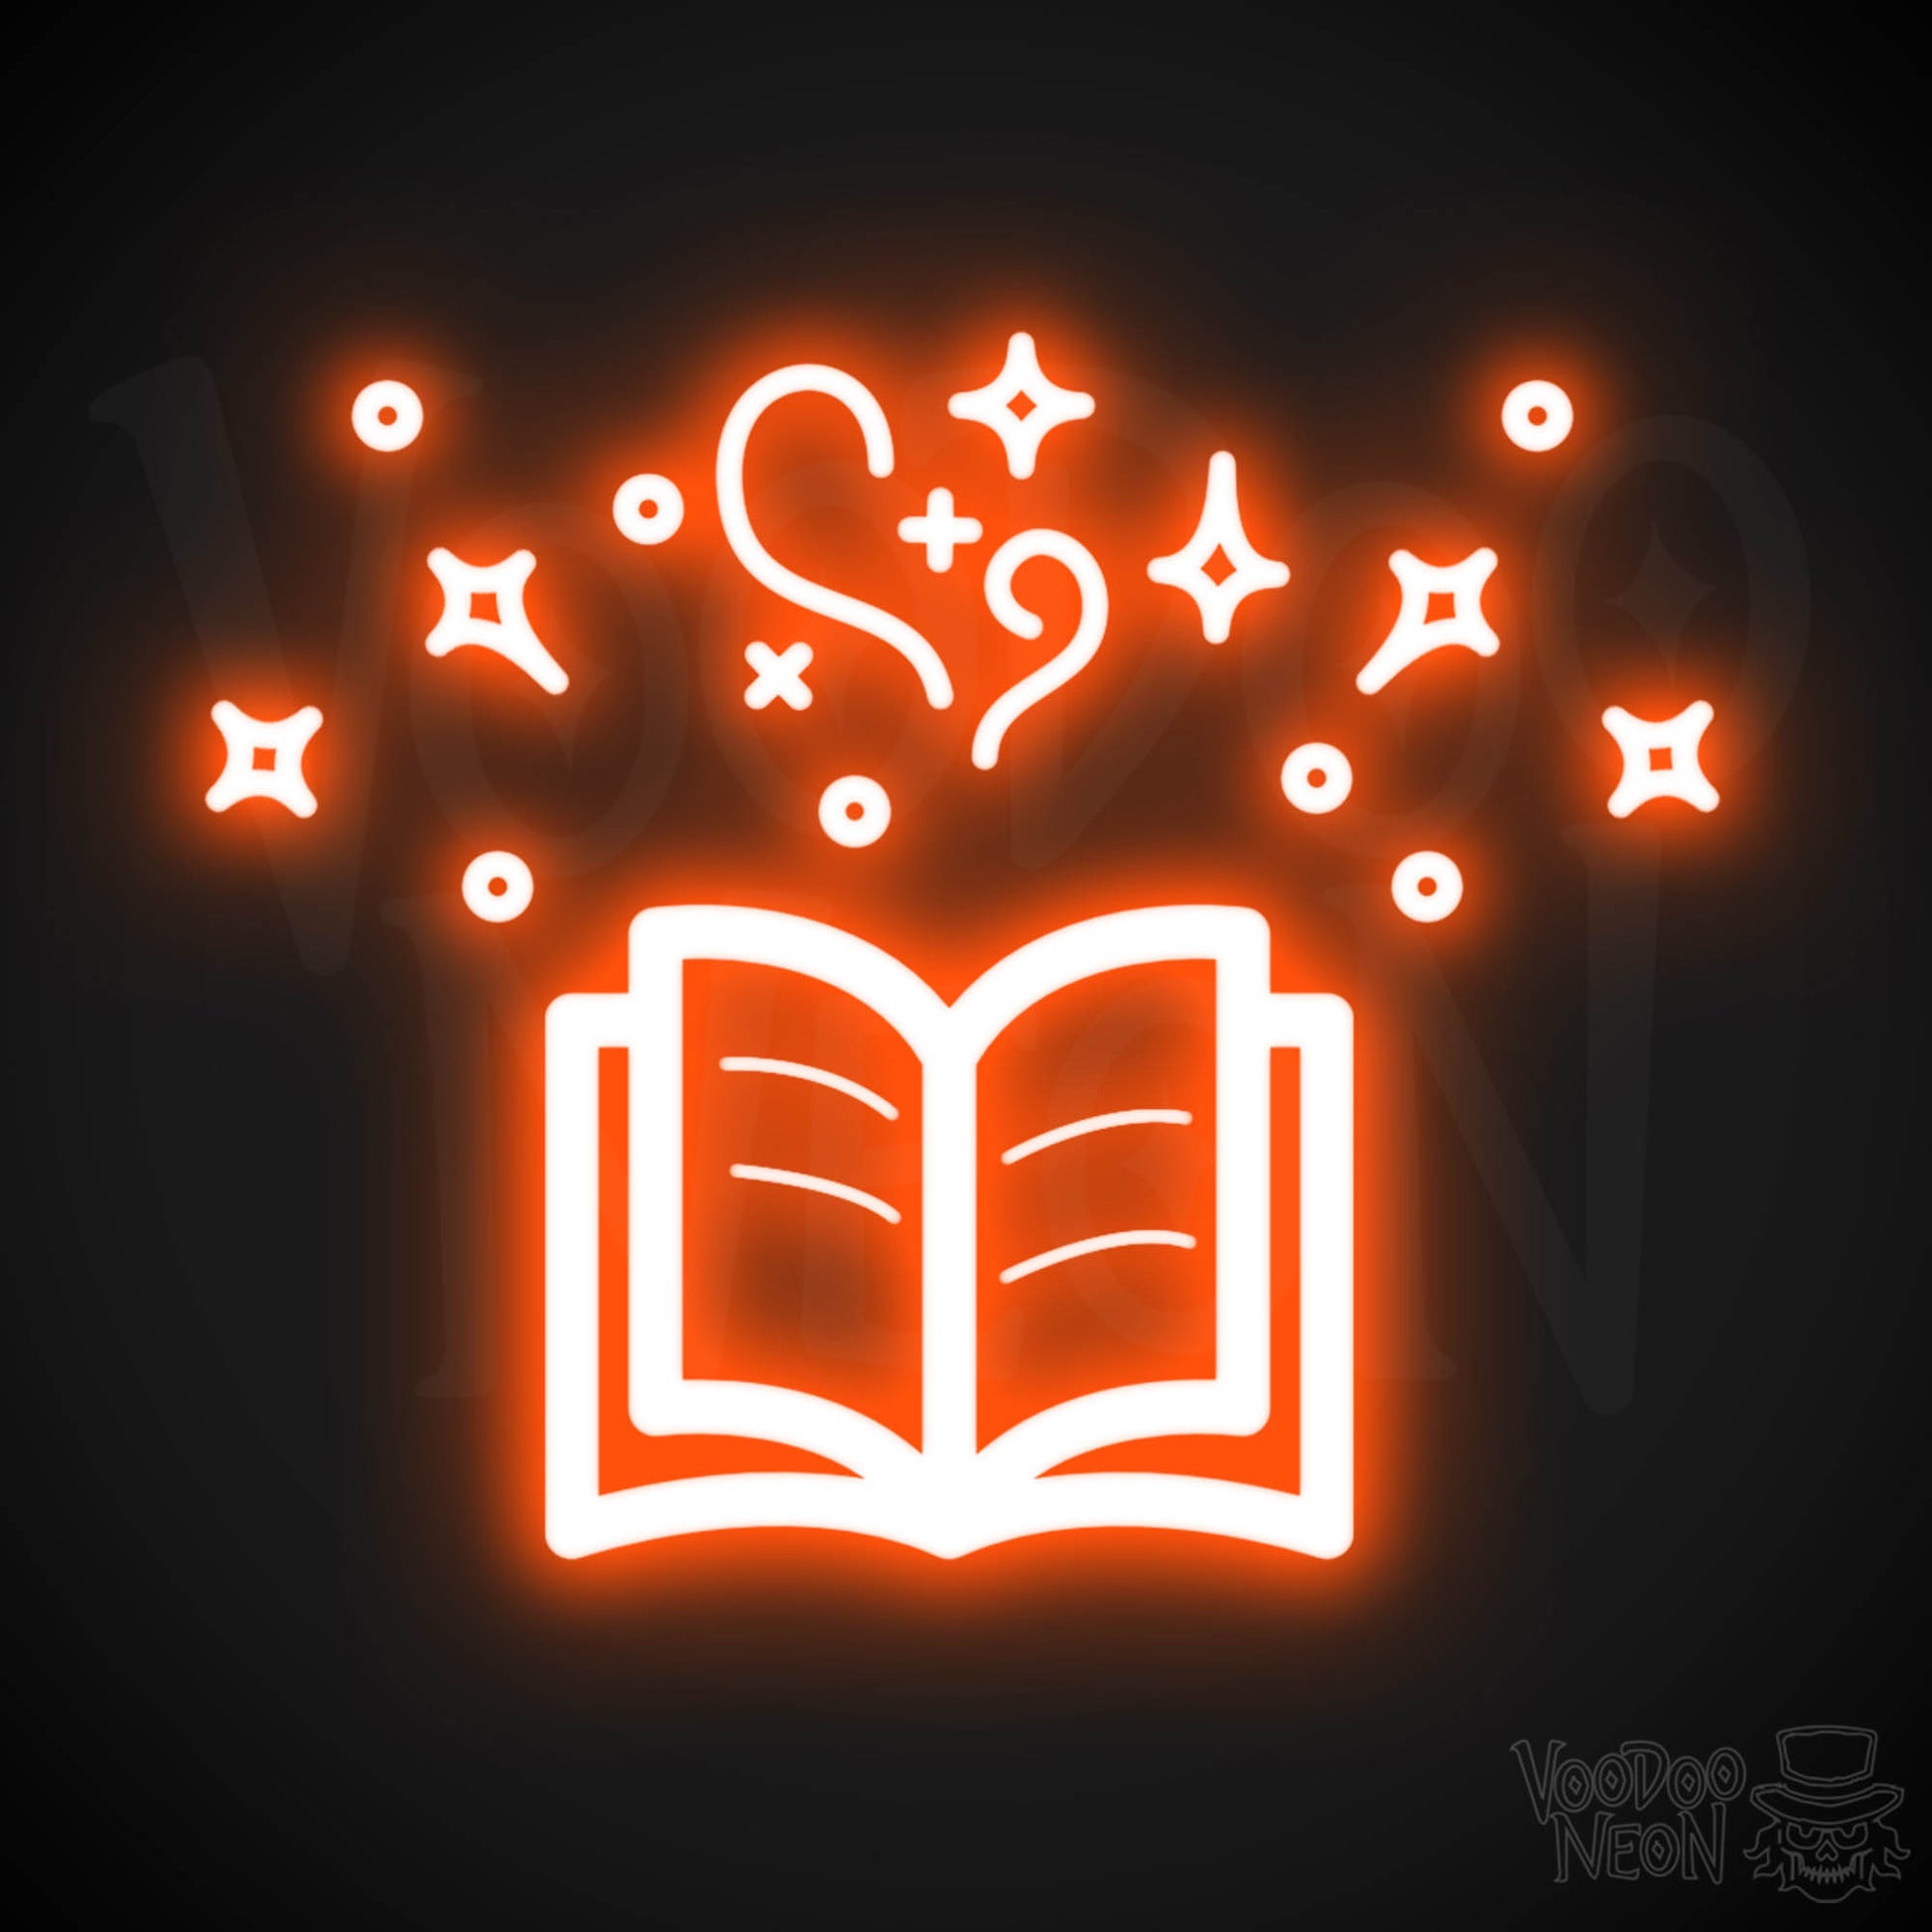 Neon Spell Book - Spell Book Neon Sign - LED Neon Wall Art - Color Orange